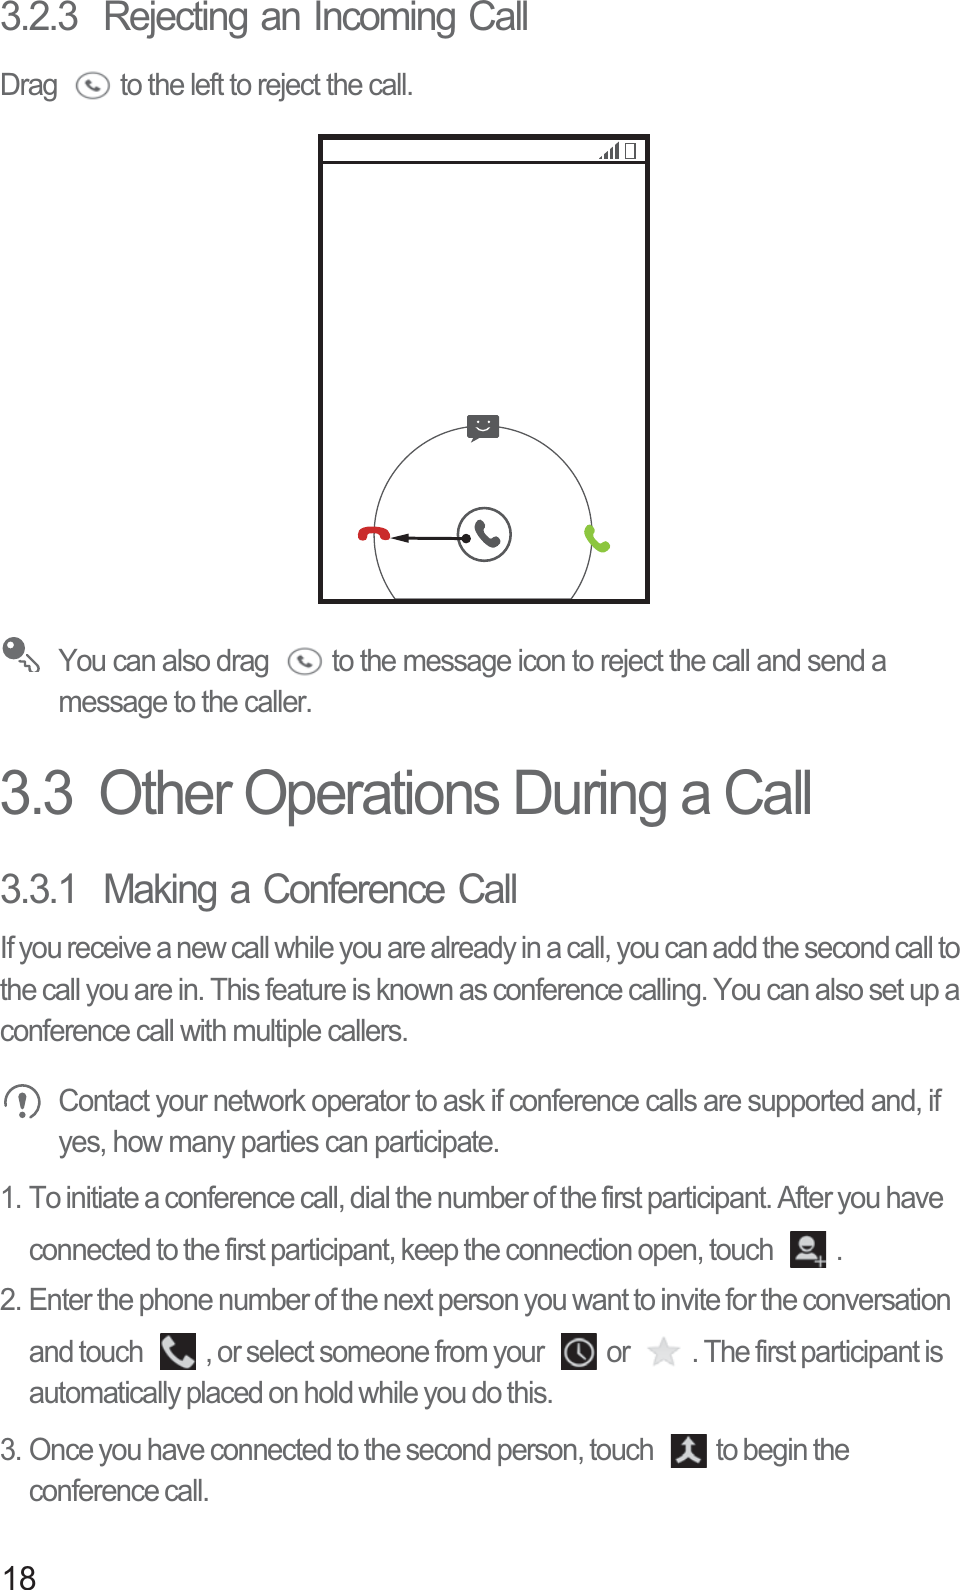 183.2.3  Rejecting an Incoming CallDrag  to the left to reject the call. You can also drag  to the message icon to reject the call and send a message to the caller. 3.3  Other Operations During a Call3.3.1  Making a Conference CallIf you receive a new call while you are already in a call, you can add the second call to the call you are in. This feature is known as conference calling. You can also set up a conference call with multiple callers. Contact your network operator to ask if conference calls are supported and, if yes, how many parties can participate.1. To initiate a conference call, dial the number of the first participant. After you have connected to the first participant, keep the connection open, touch  .2. Enter the phone number of the next person you want to invite for the conversation and touch  , or select someone from your  or  . The first participant is automatically placed on hold while you do this.3. Once you have connected to the second person, touch  to begin the conference call.